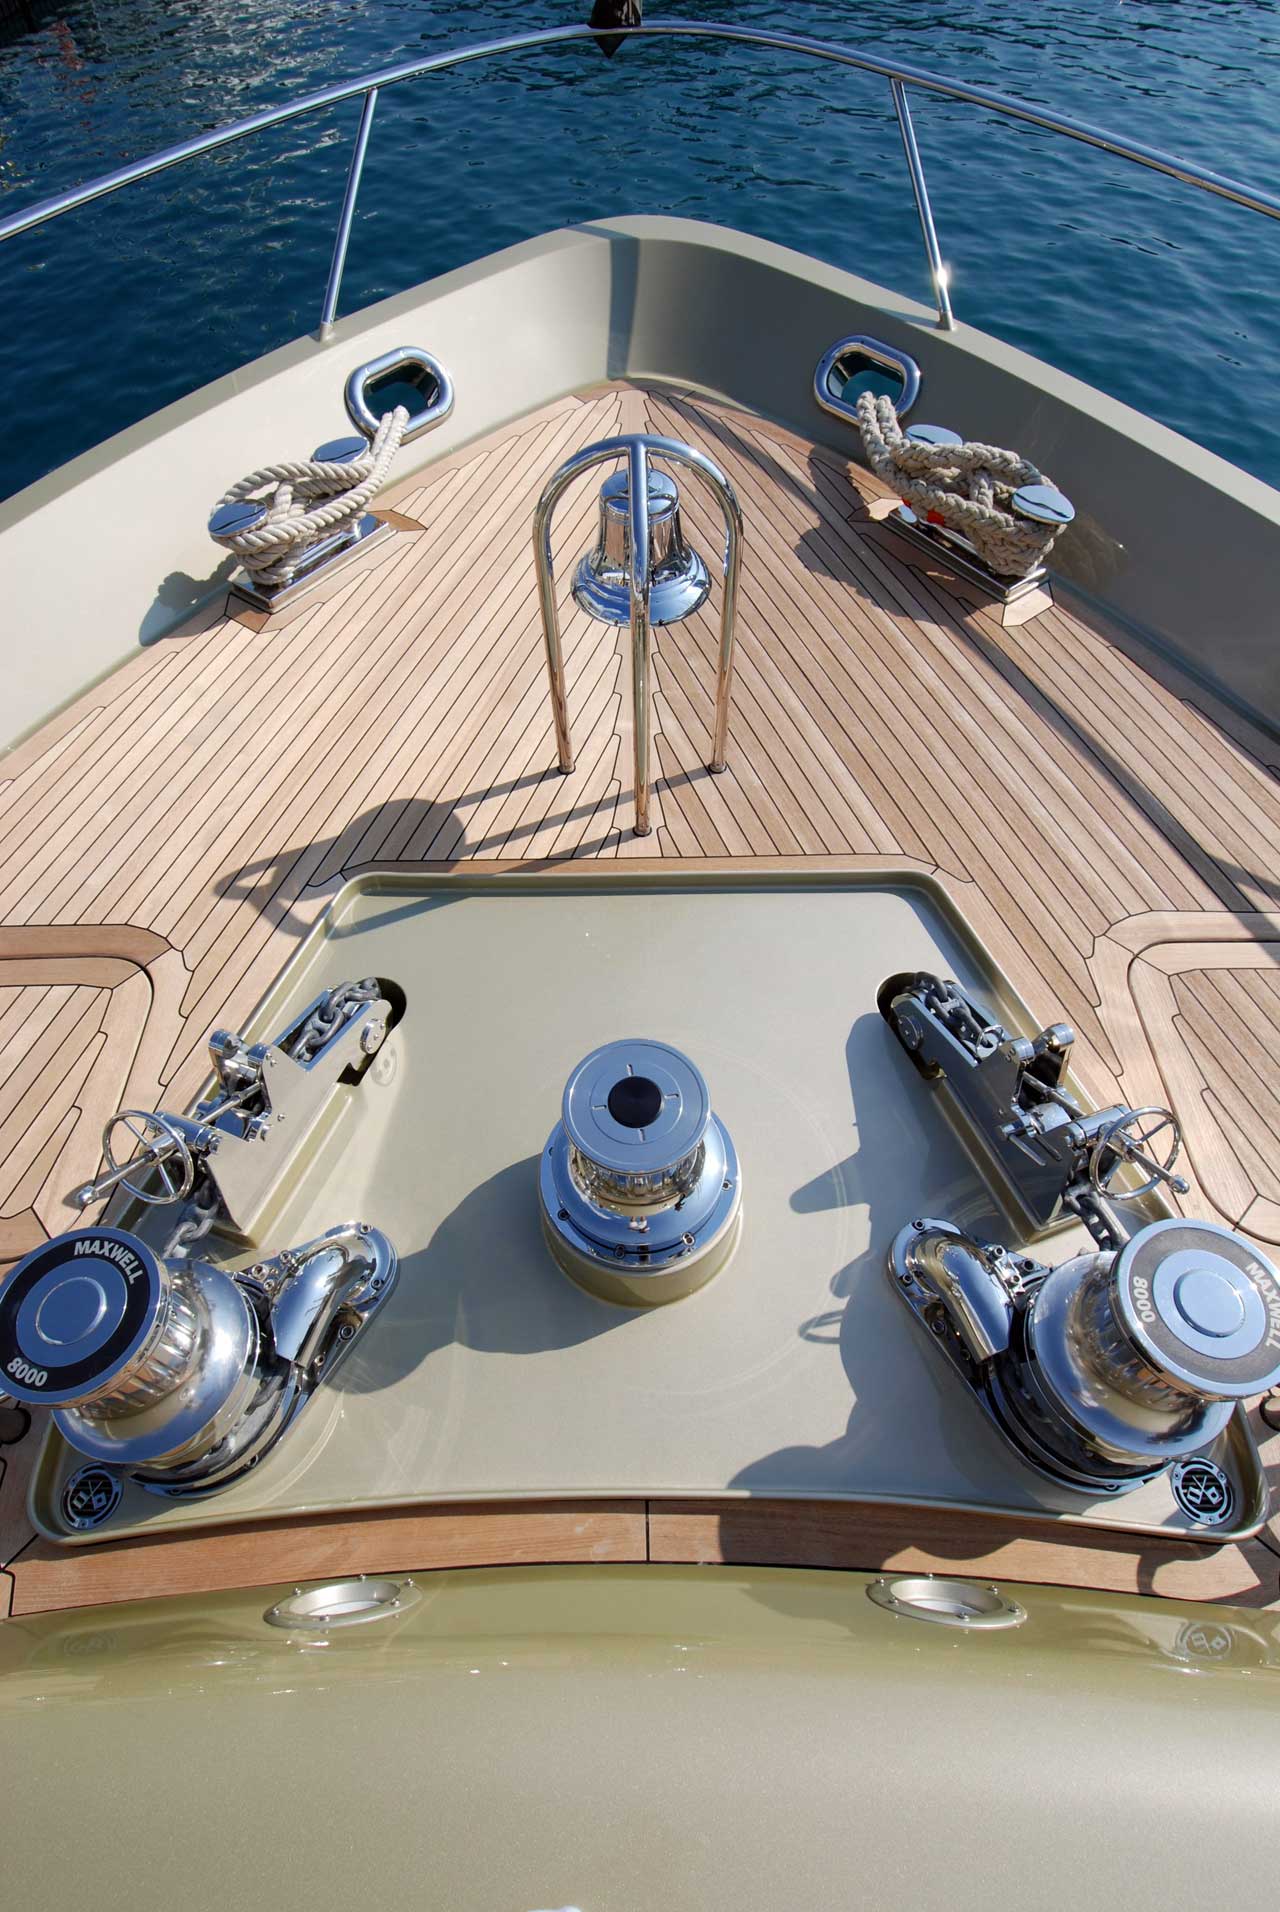  Favoring sustainable yachting practices